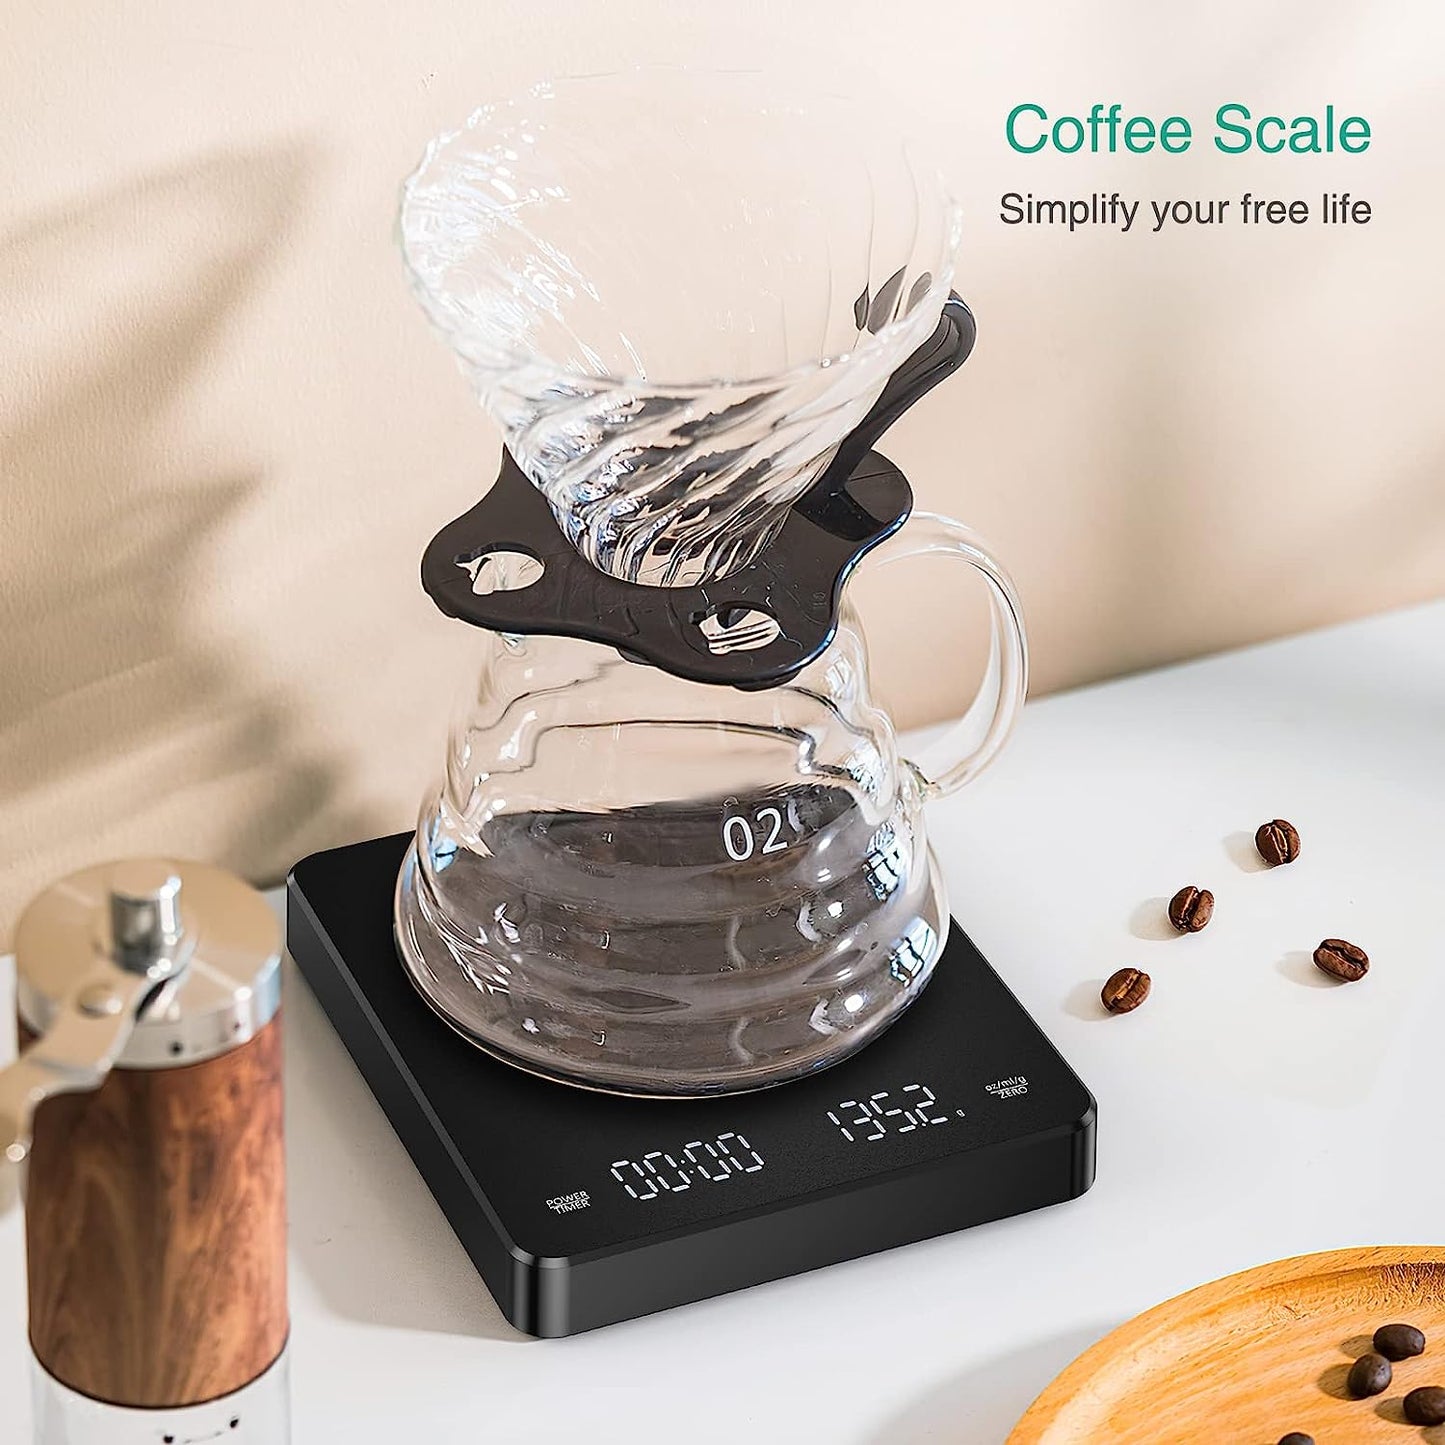 Digital Food Scale,Coffee Scale with Timer, 0.1g High Precision